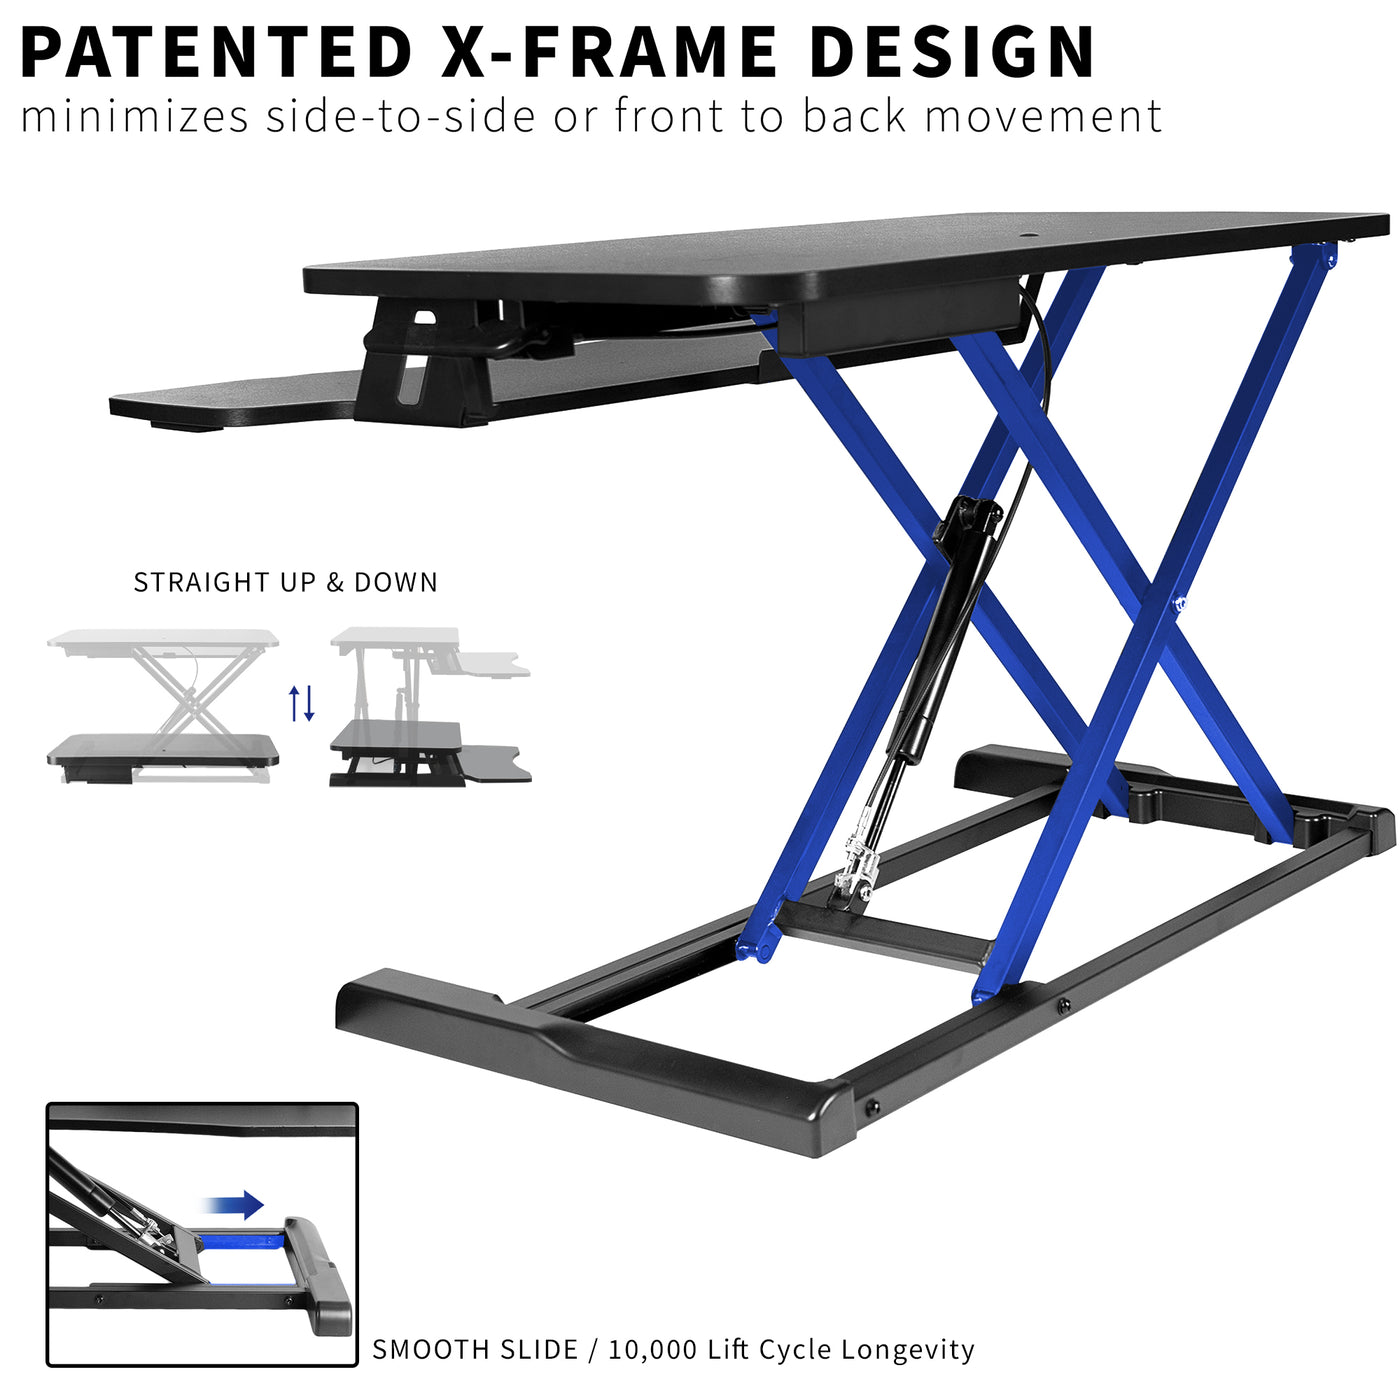 Special X-frame design for structurally sound desk riser and straight vertical movements.